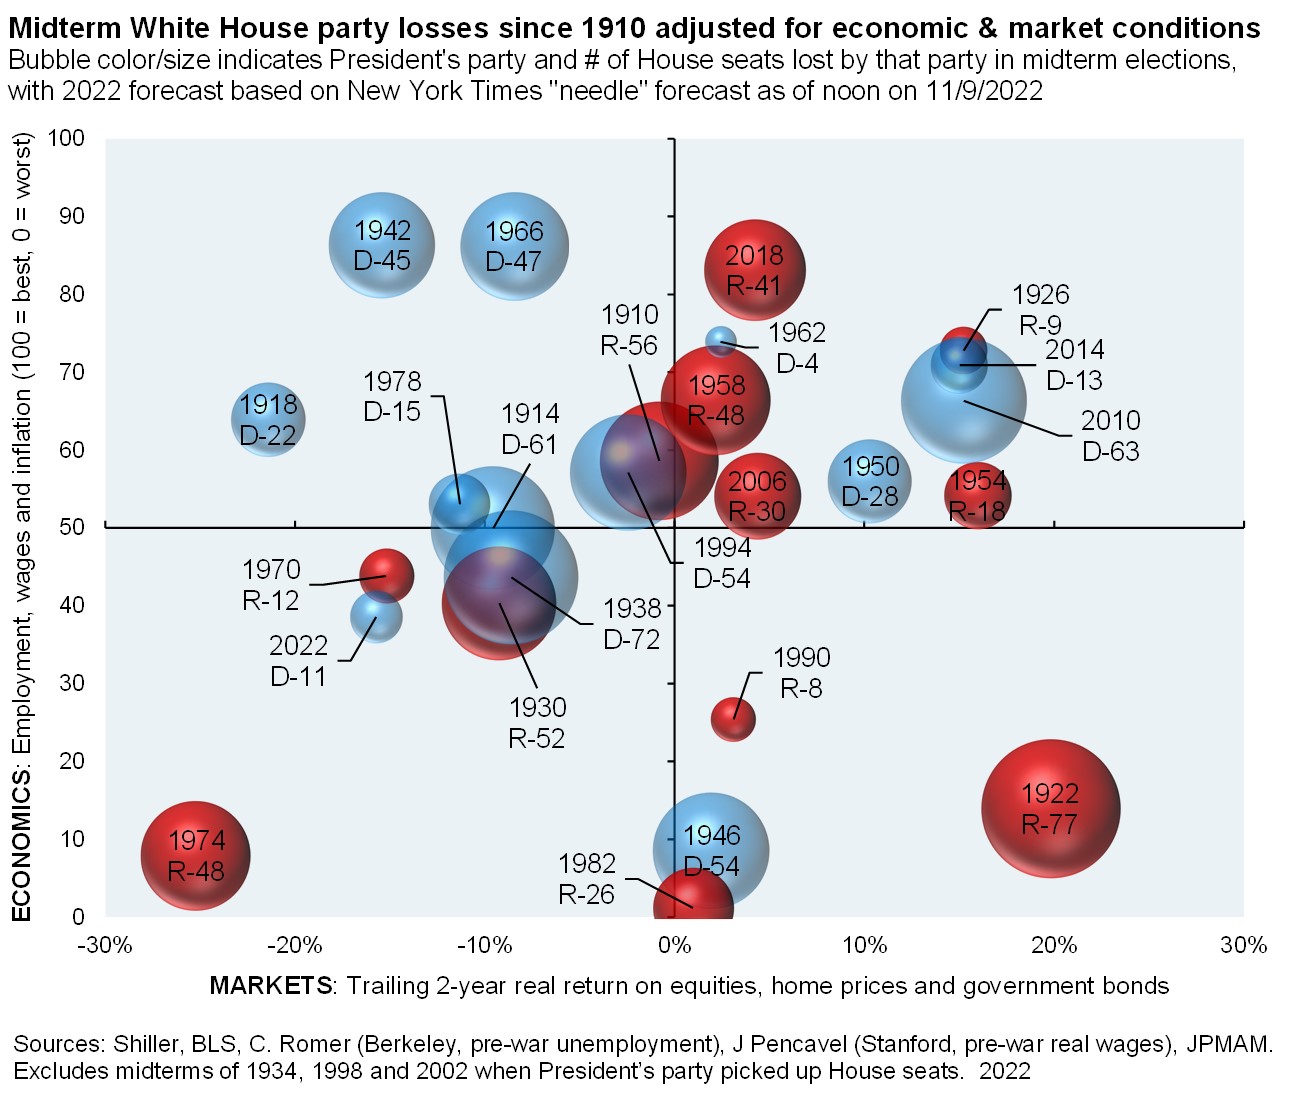 Midterm White House party losses since 1910 adjusted for economic & market conditions